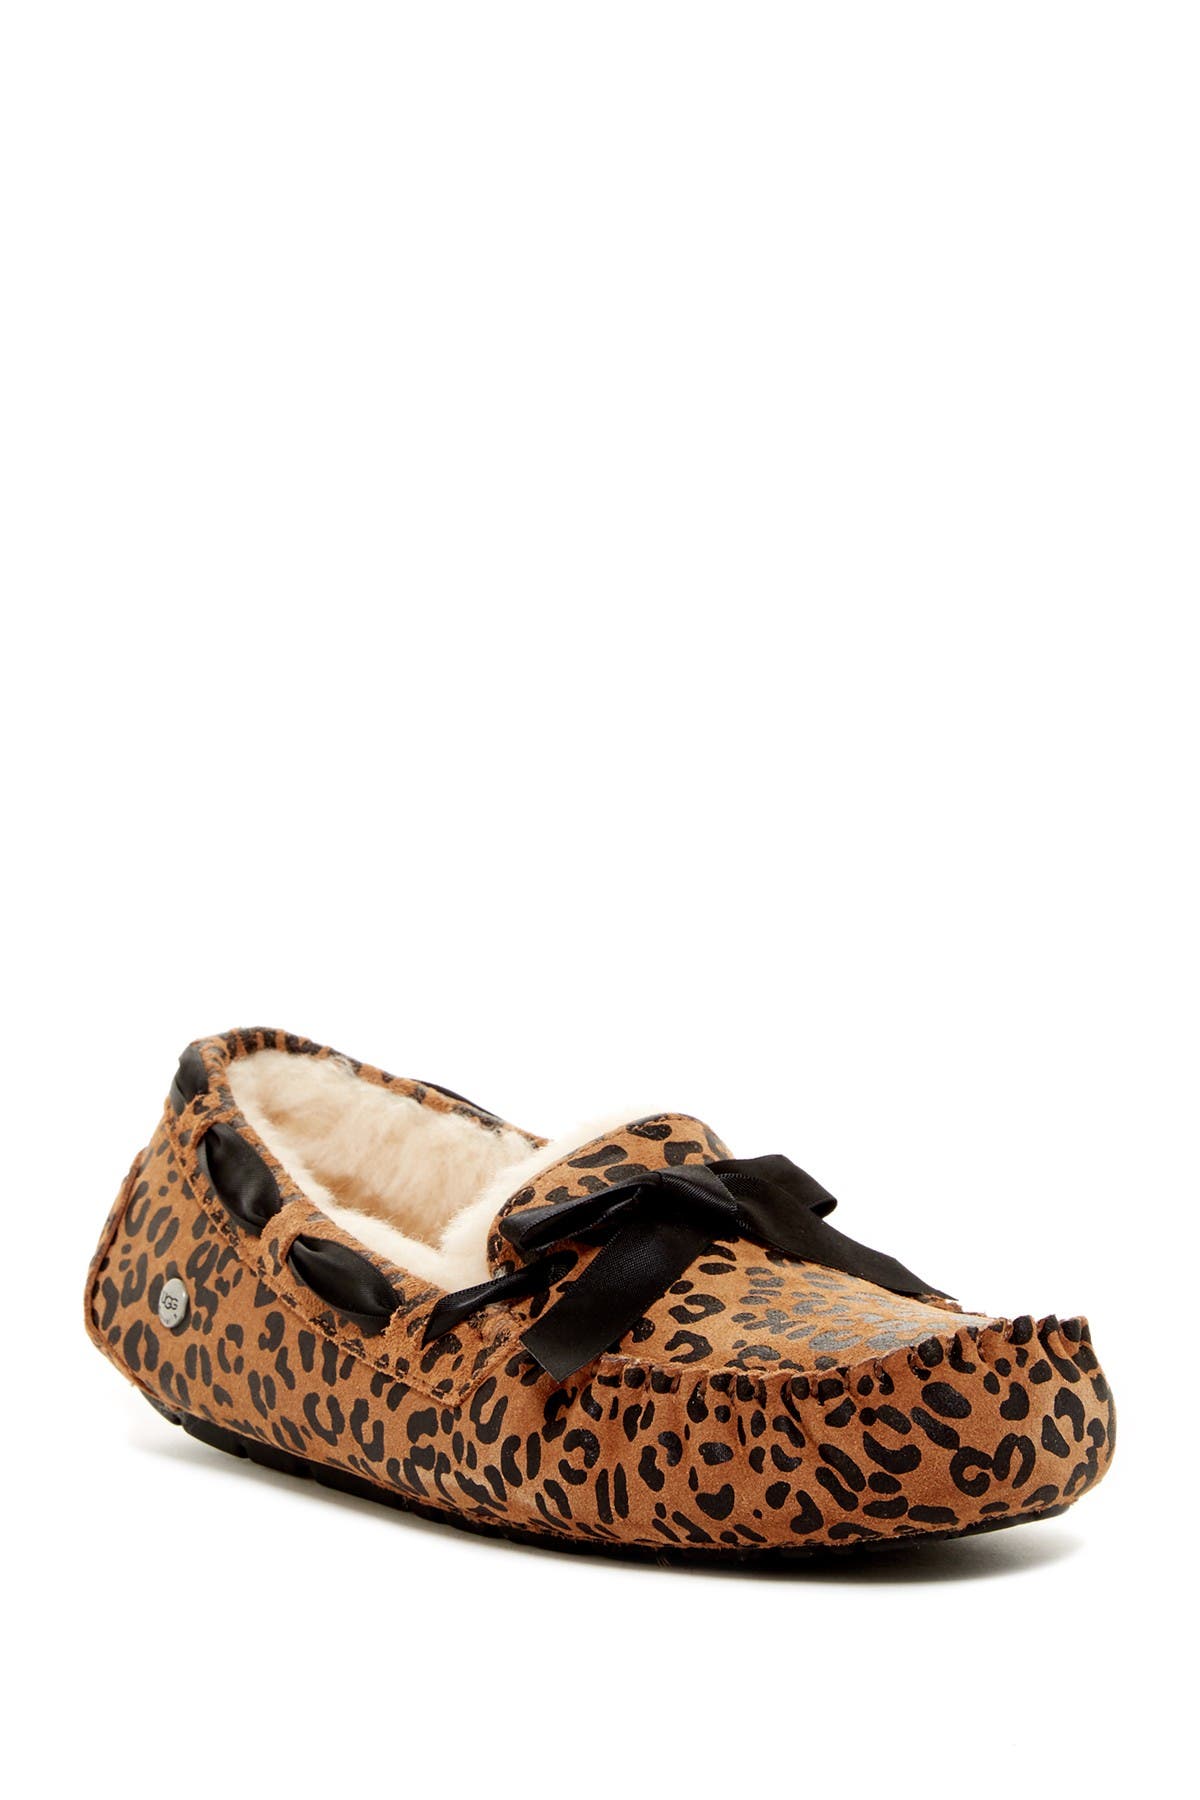 leopard print uggs slippers